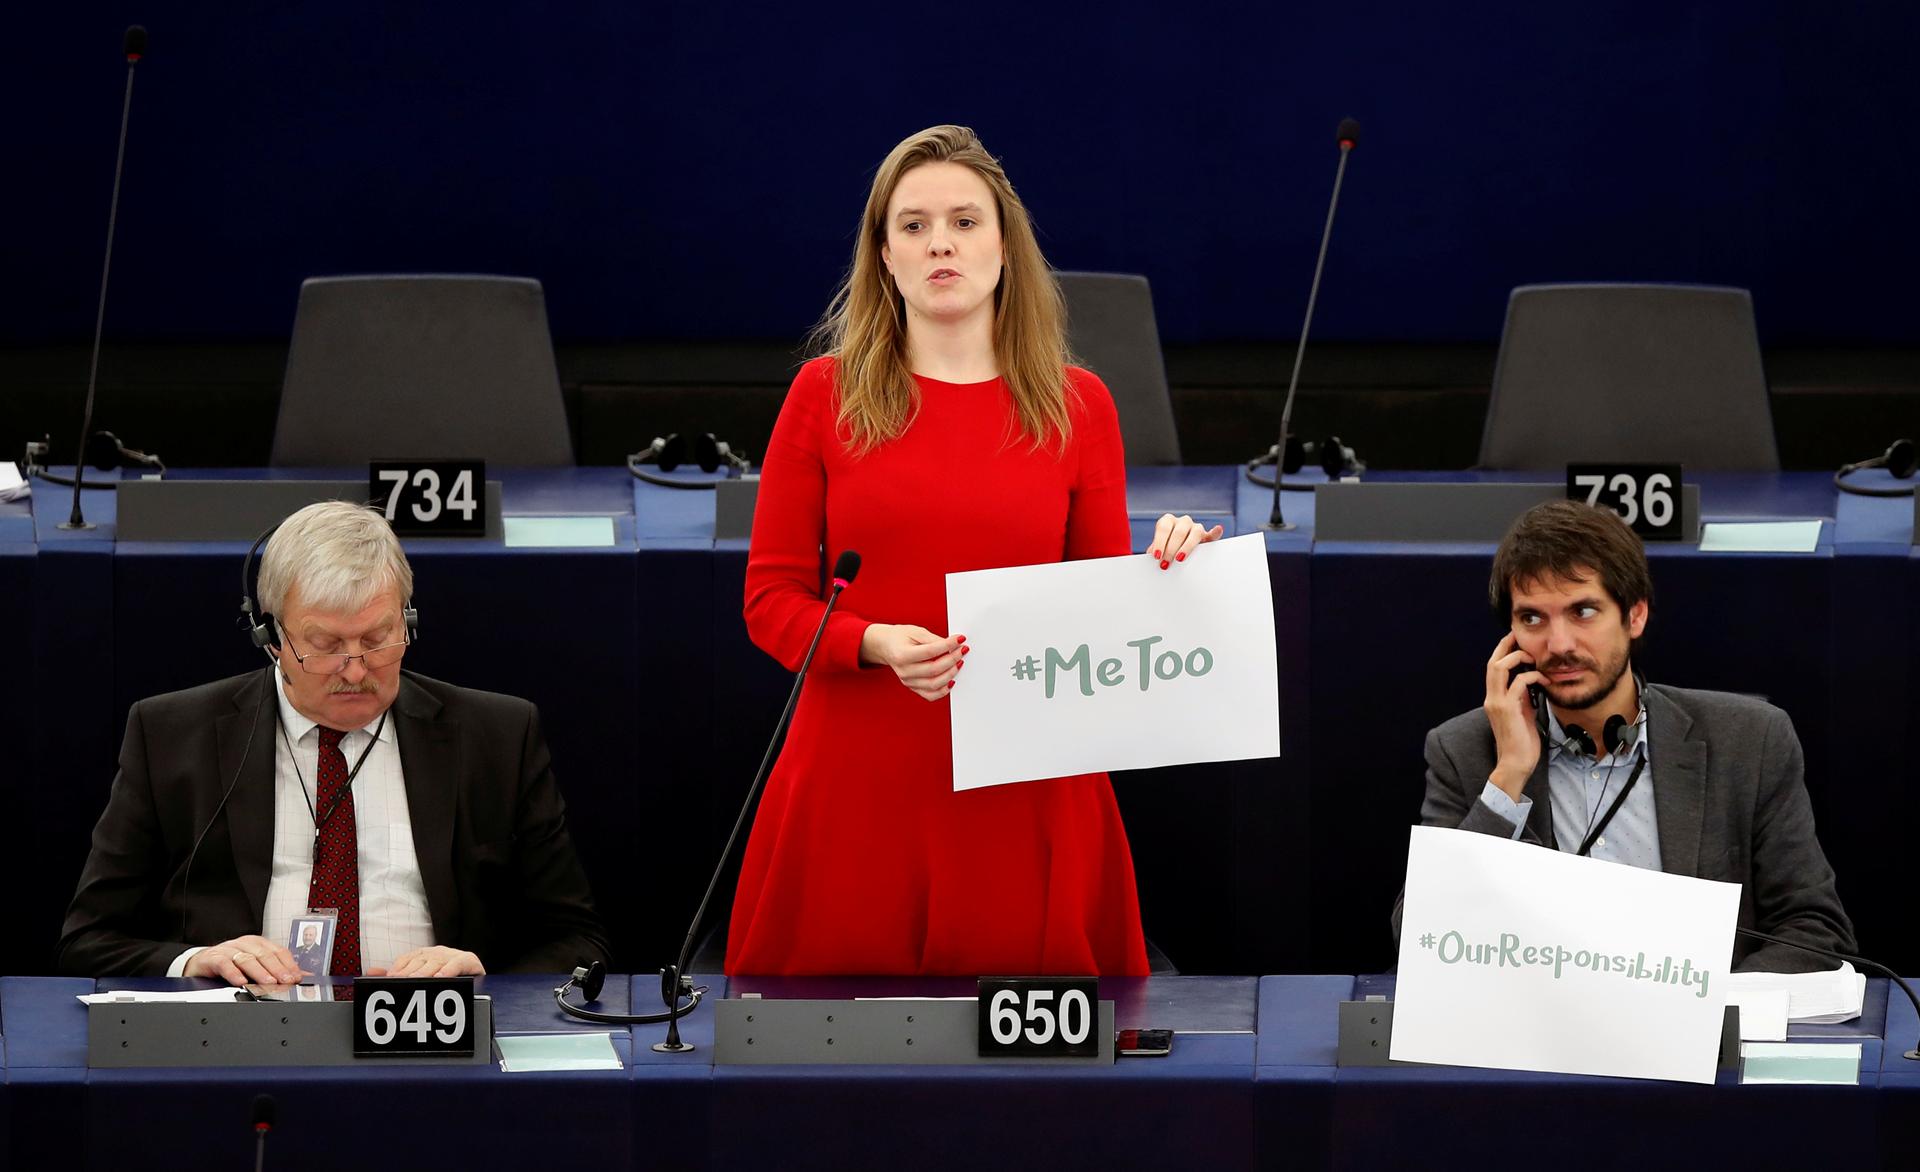 European Parliament member Terry Reintke (C) holds a placard with the hashtag "MeToo" during a debate